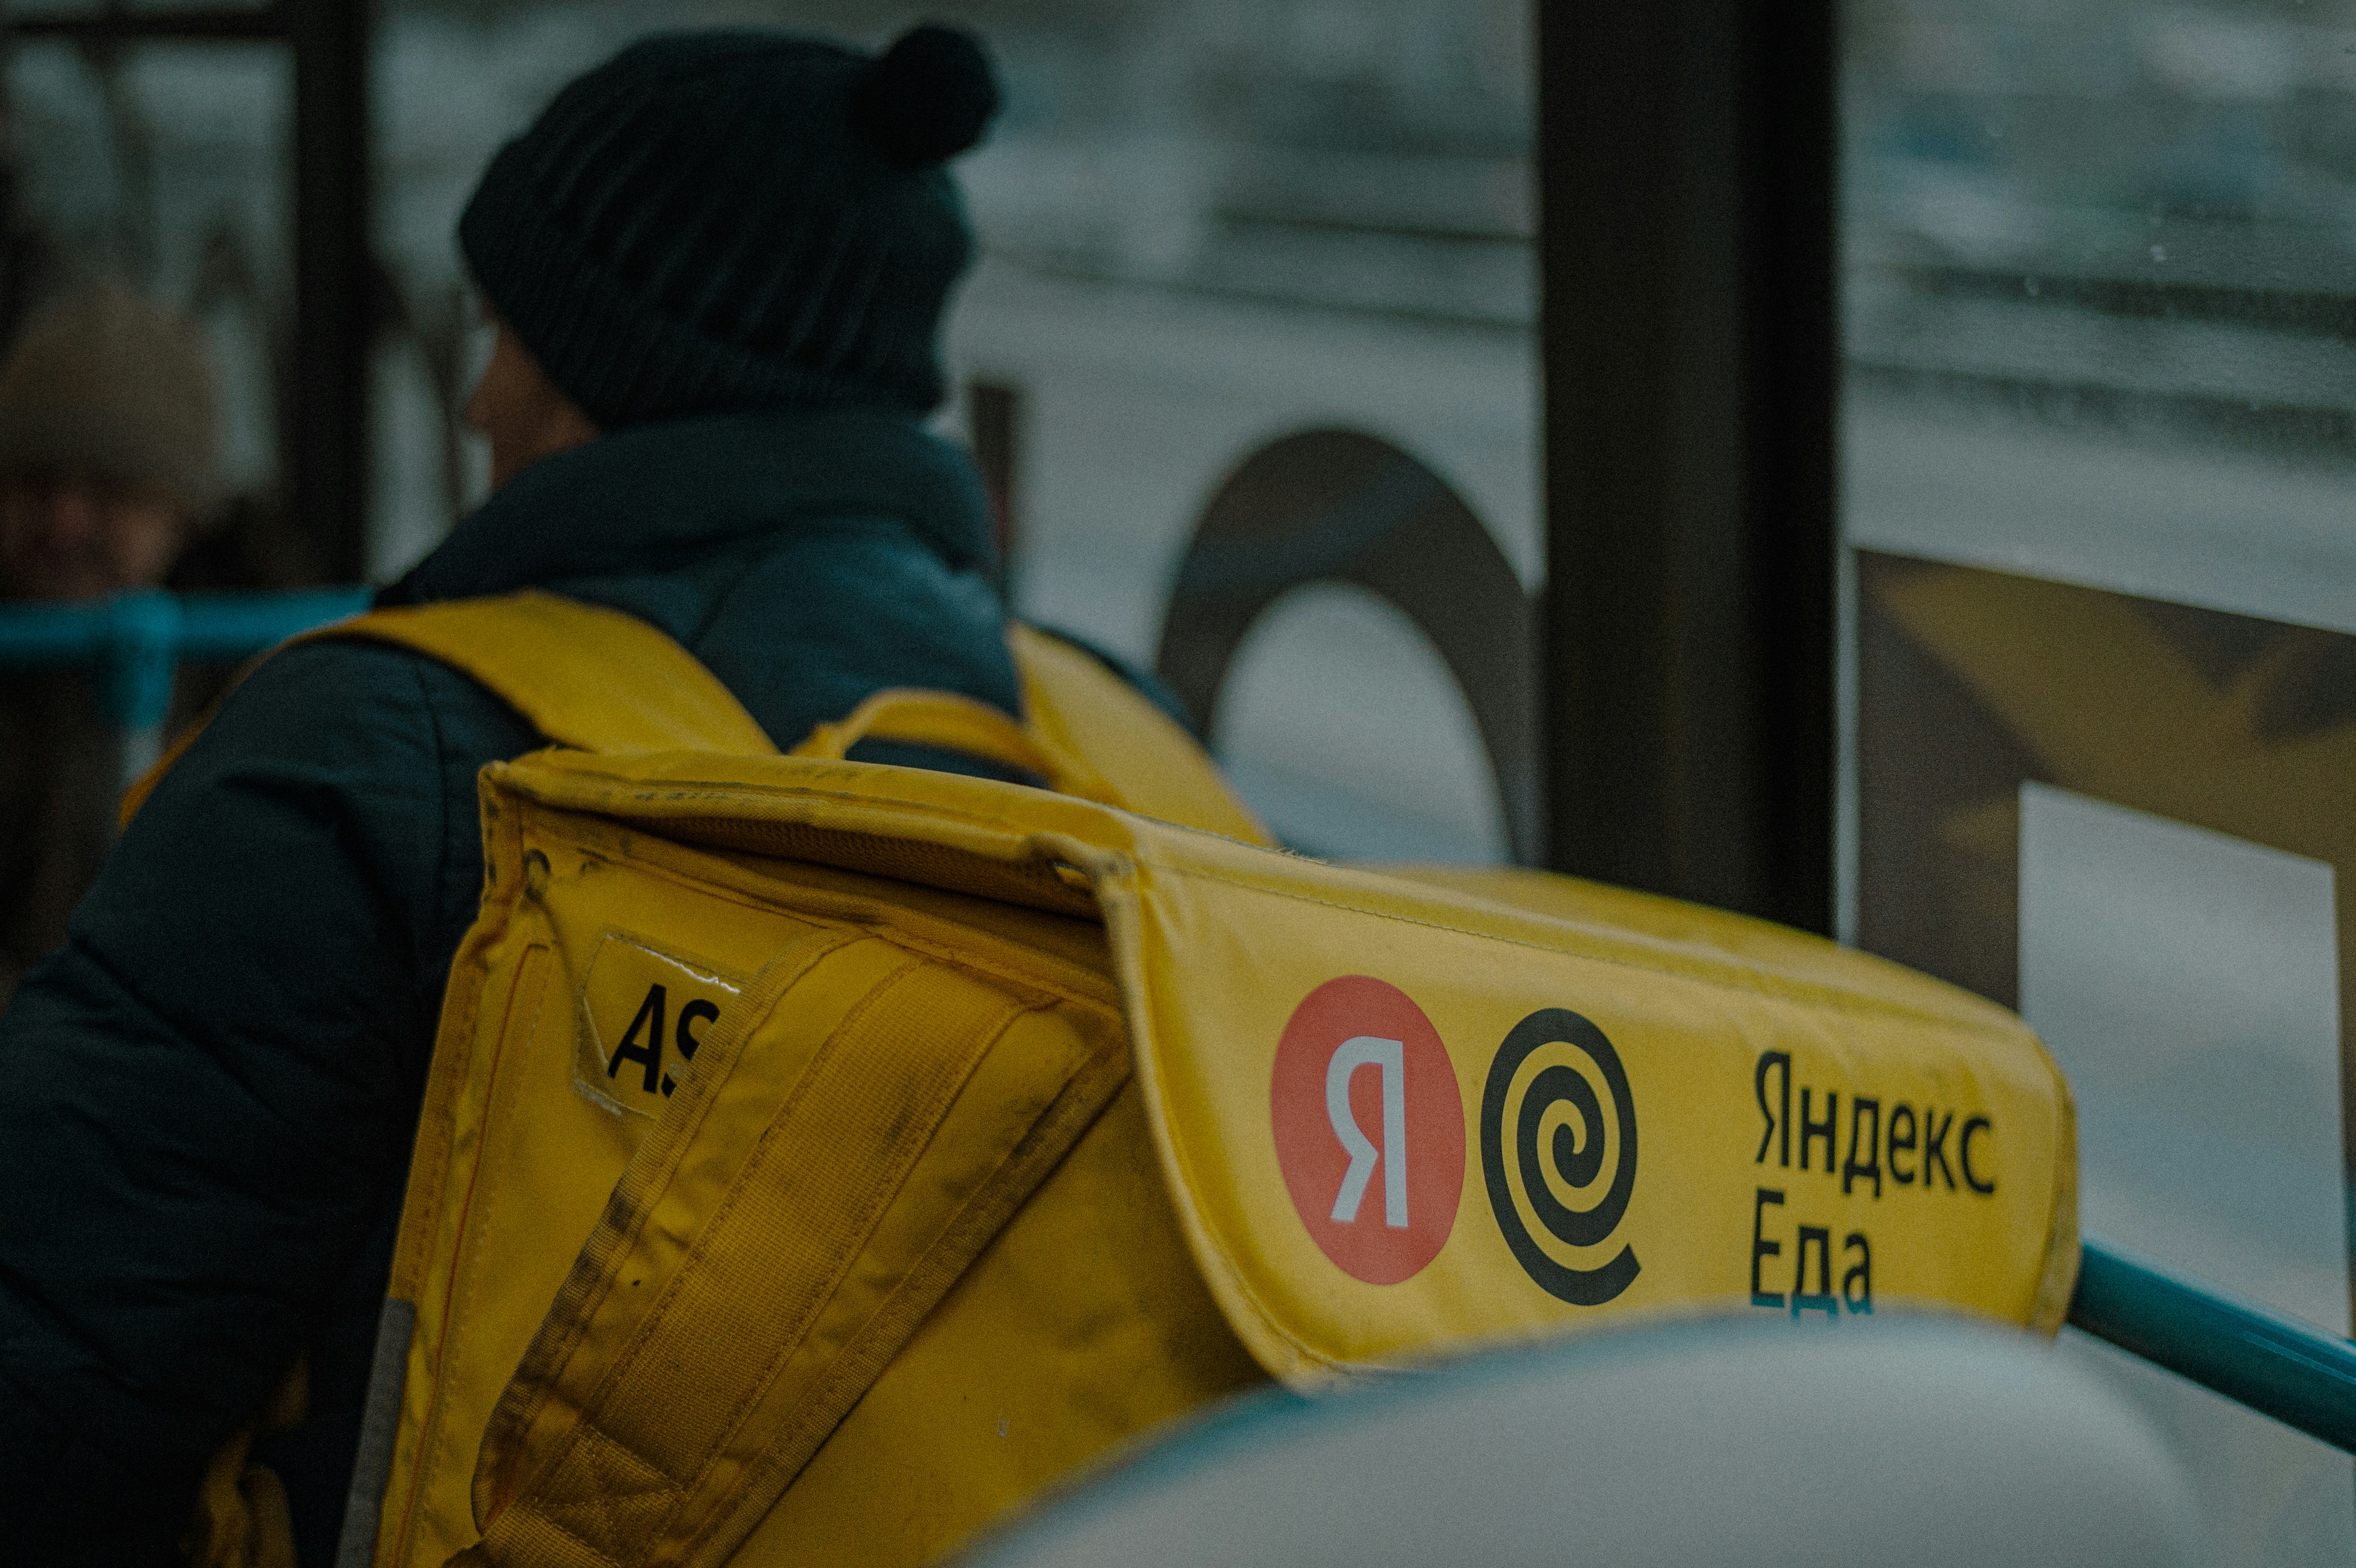 Courier with a bag of Yandex Food rides in public transportation.